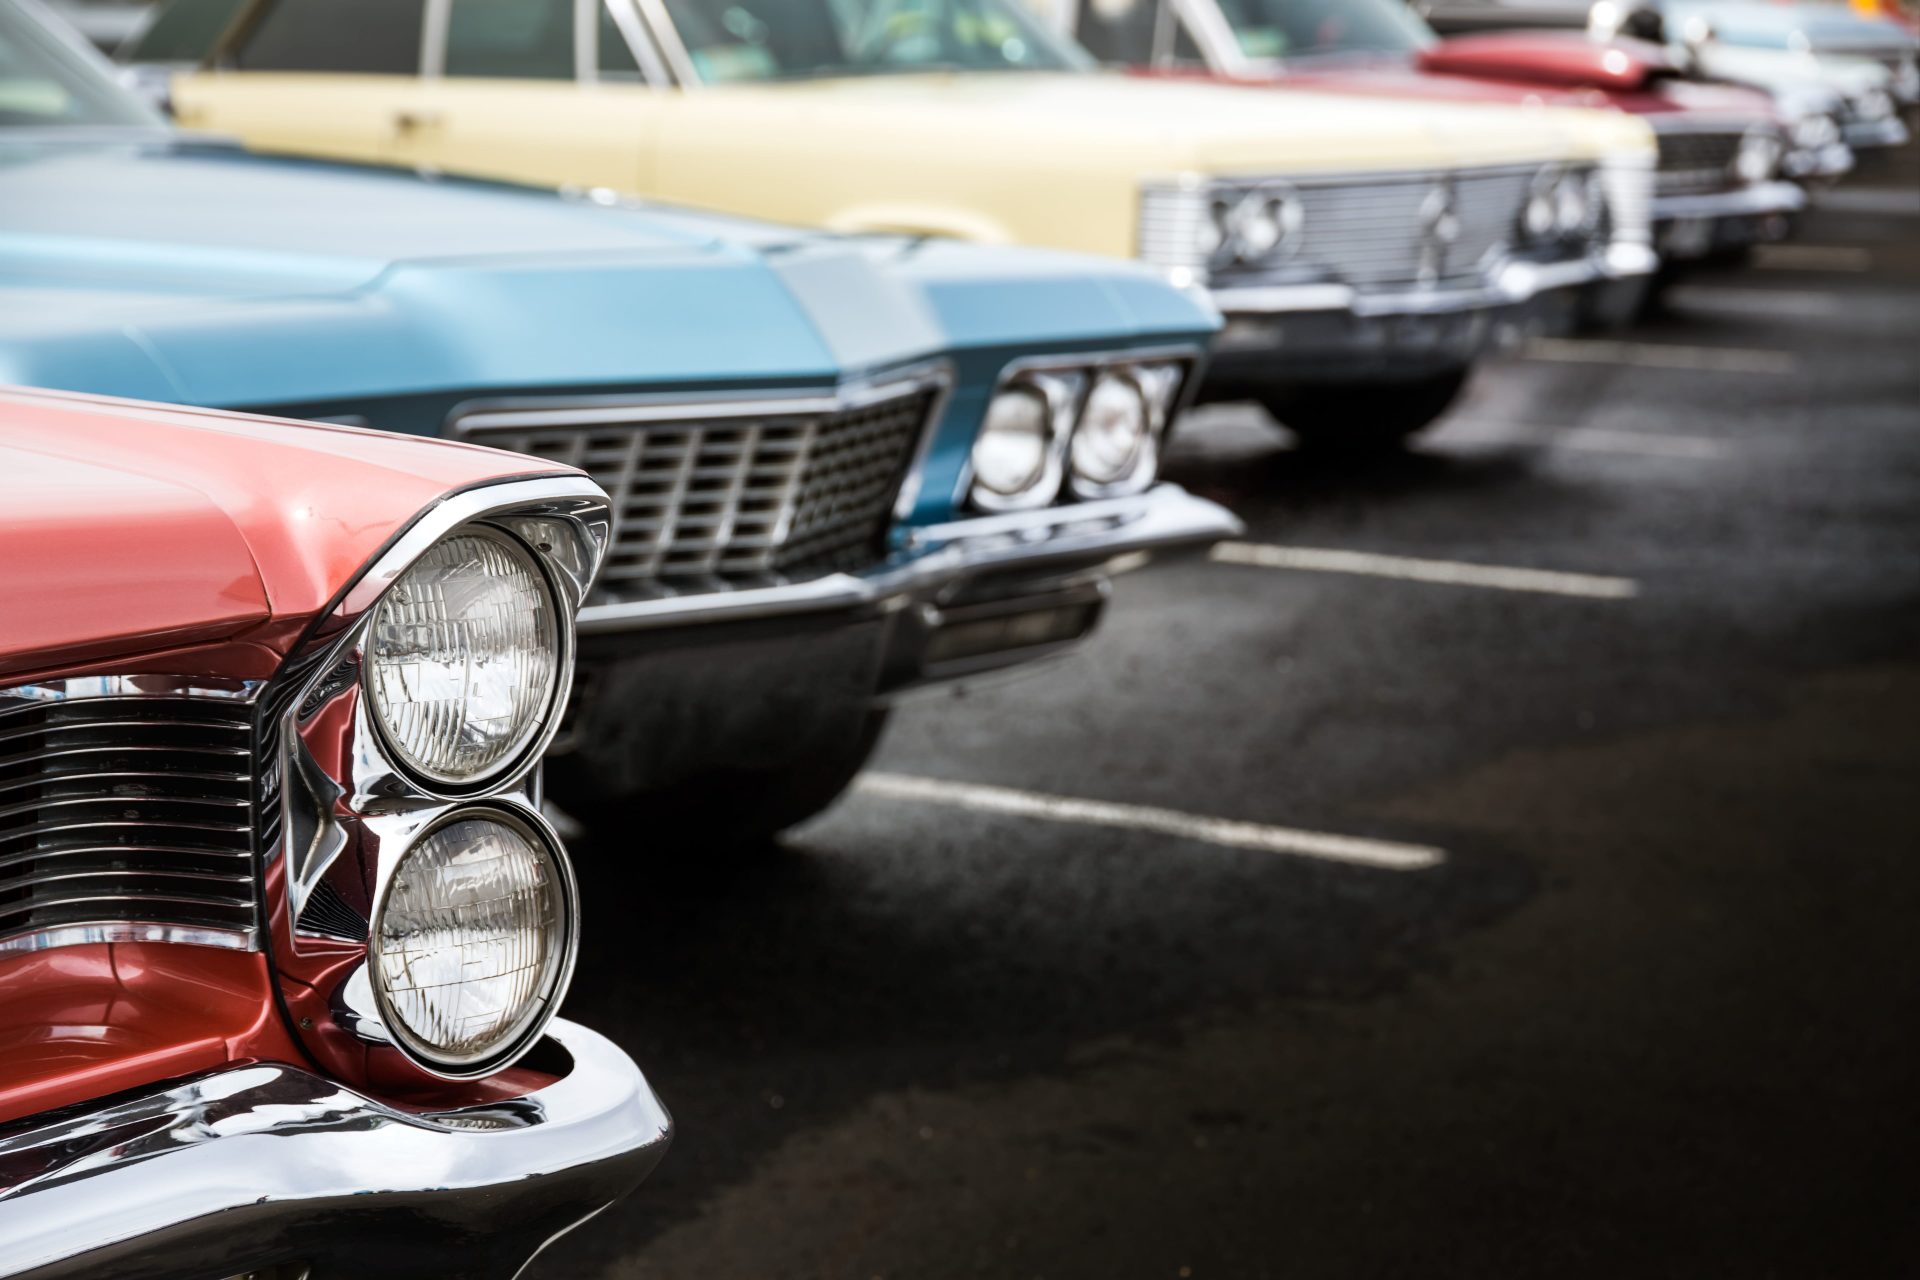 Close-up view of classic cars lined up in a parking lot, showcasing colorful vintage designs.